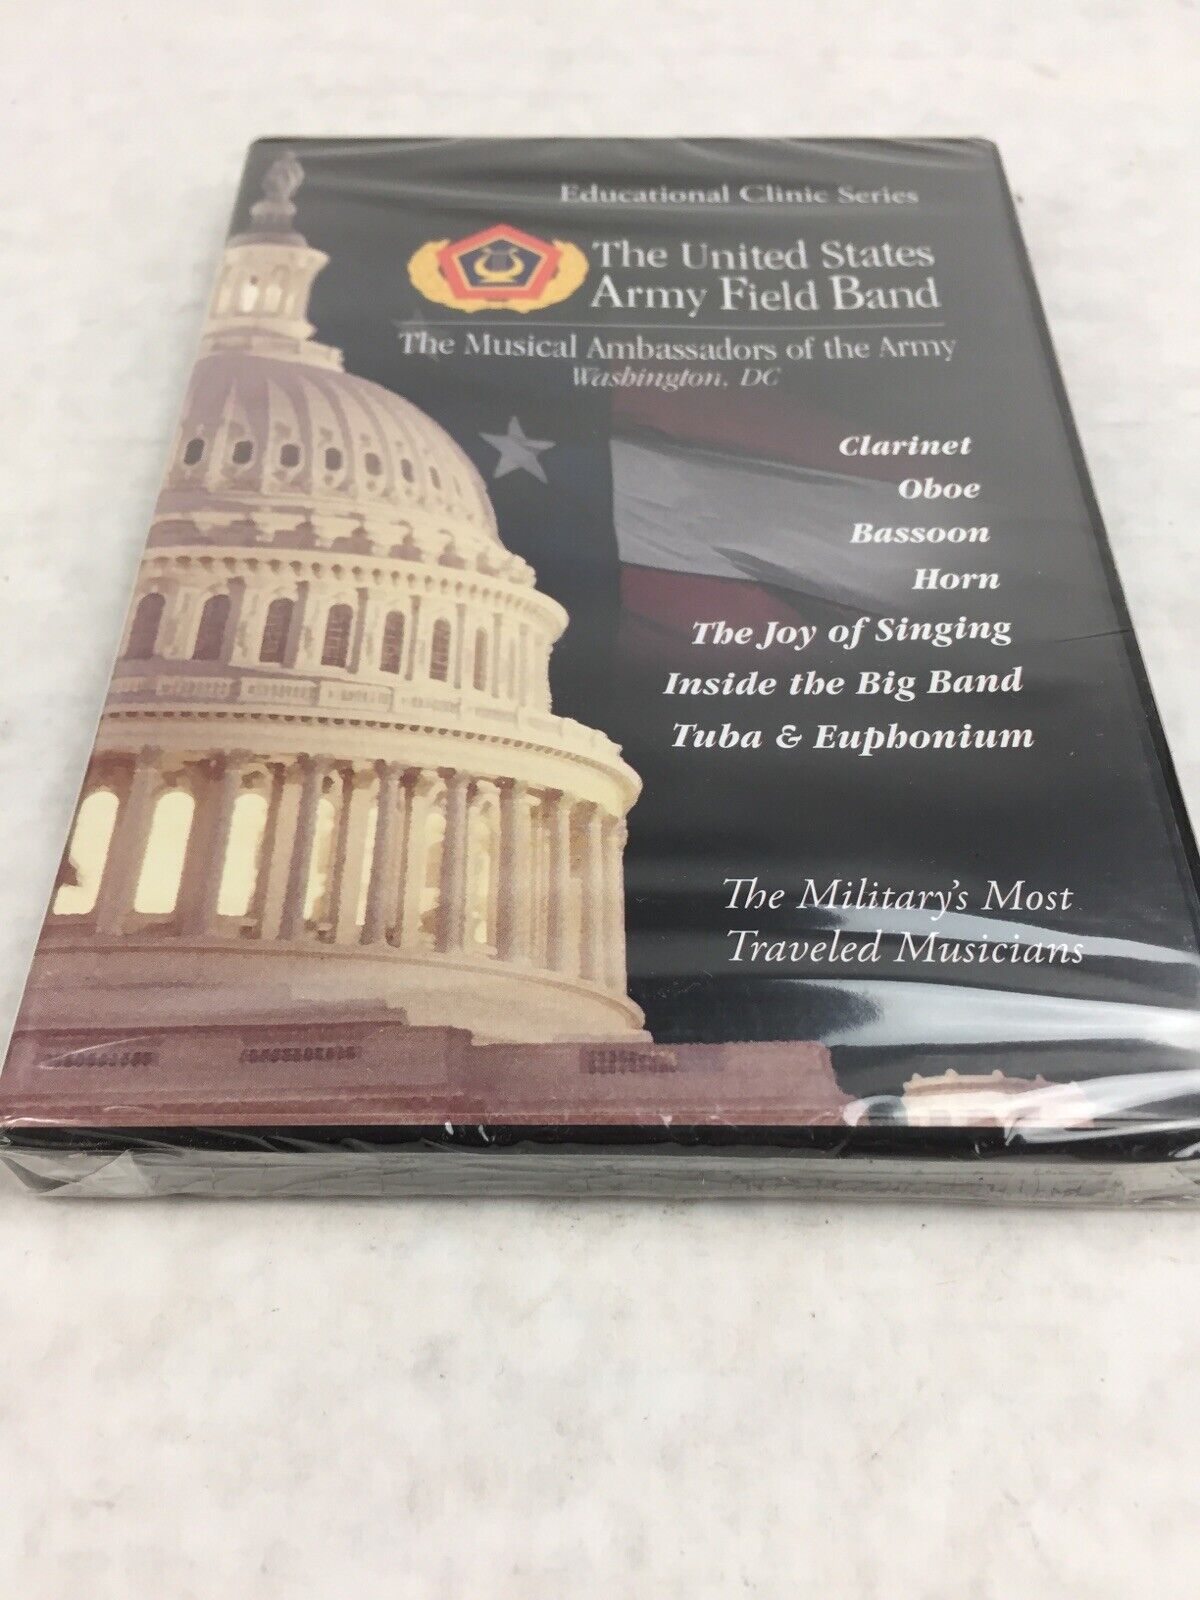 The U.S. Army Field Band Educational Clinic Series: 2-Disc Set